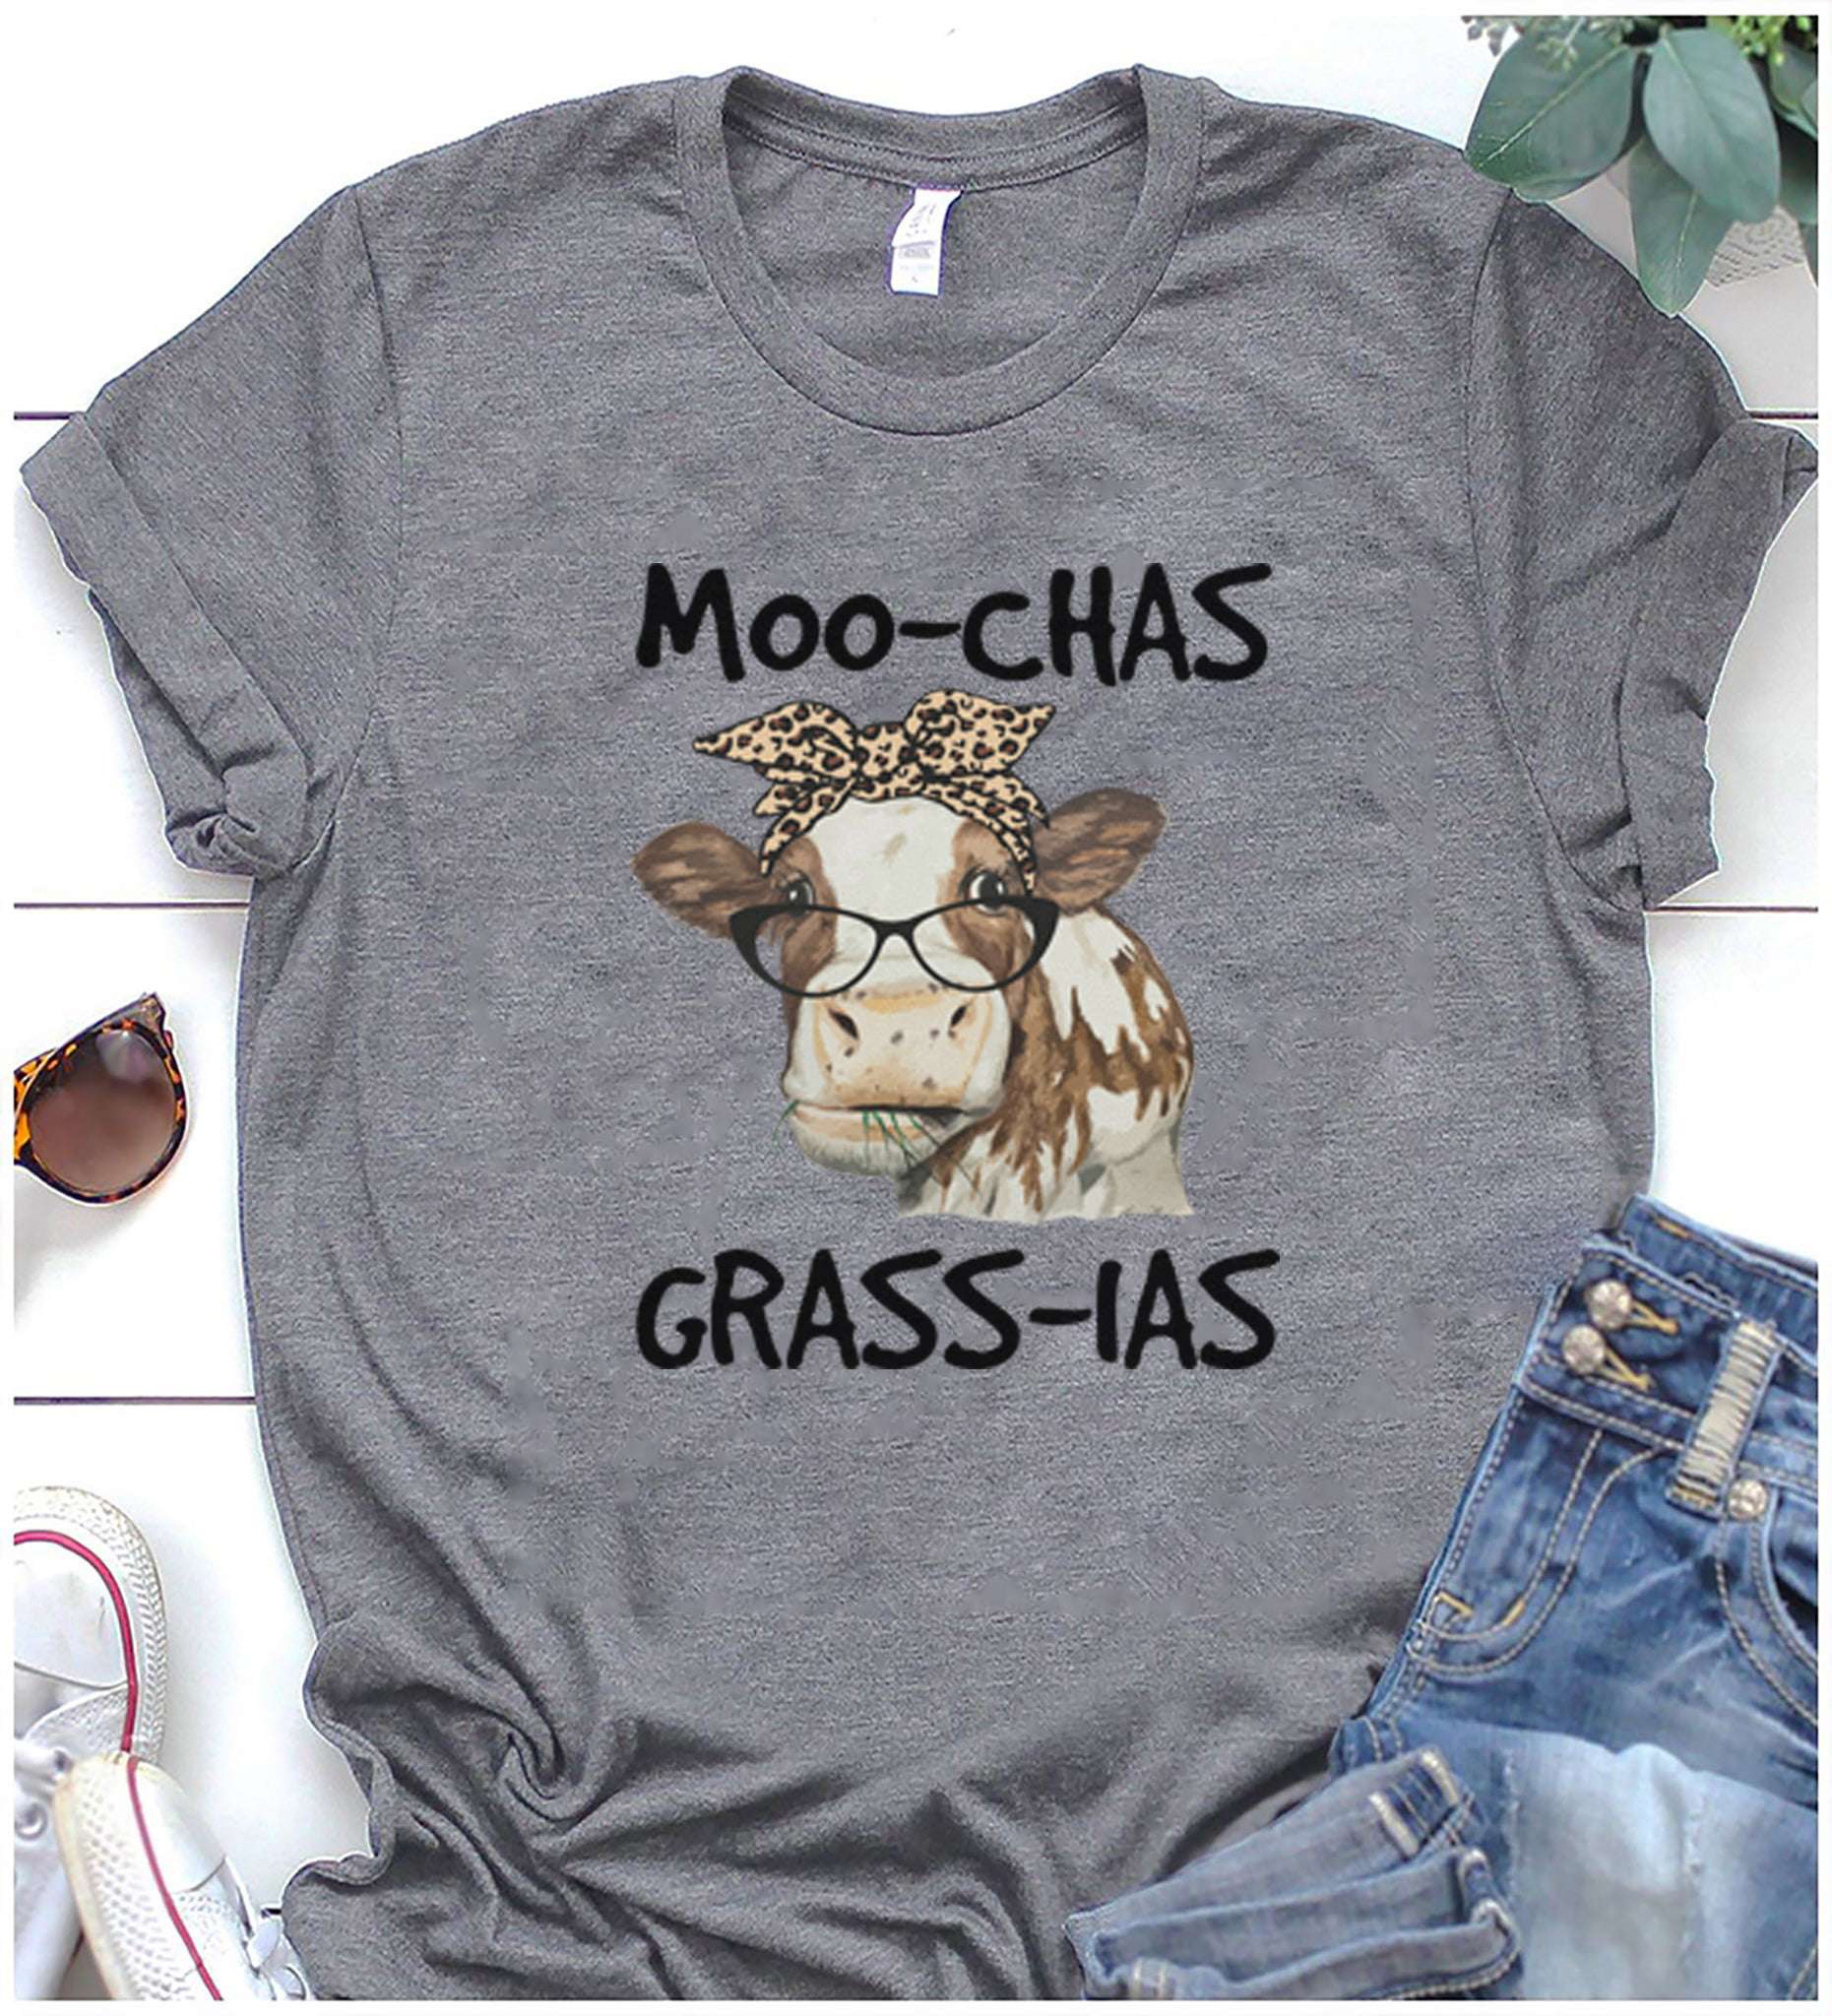 Moo-chas grass-ias - Cow with sunglasses, cow the animal